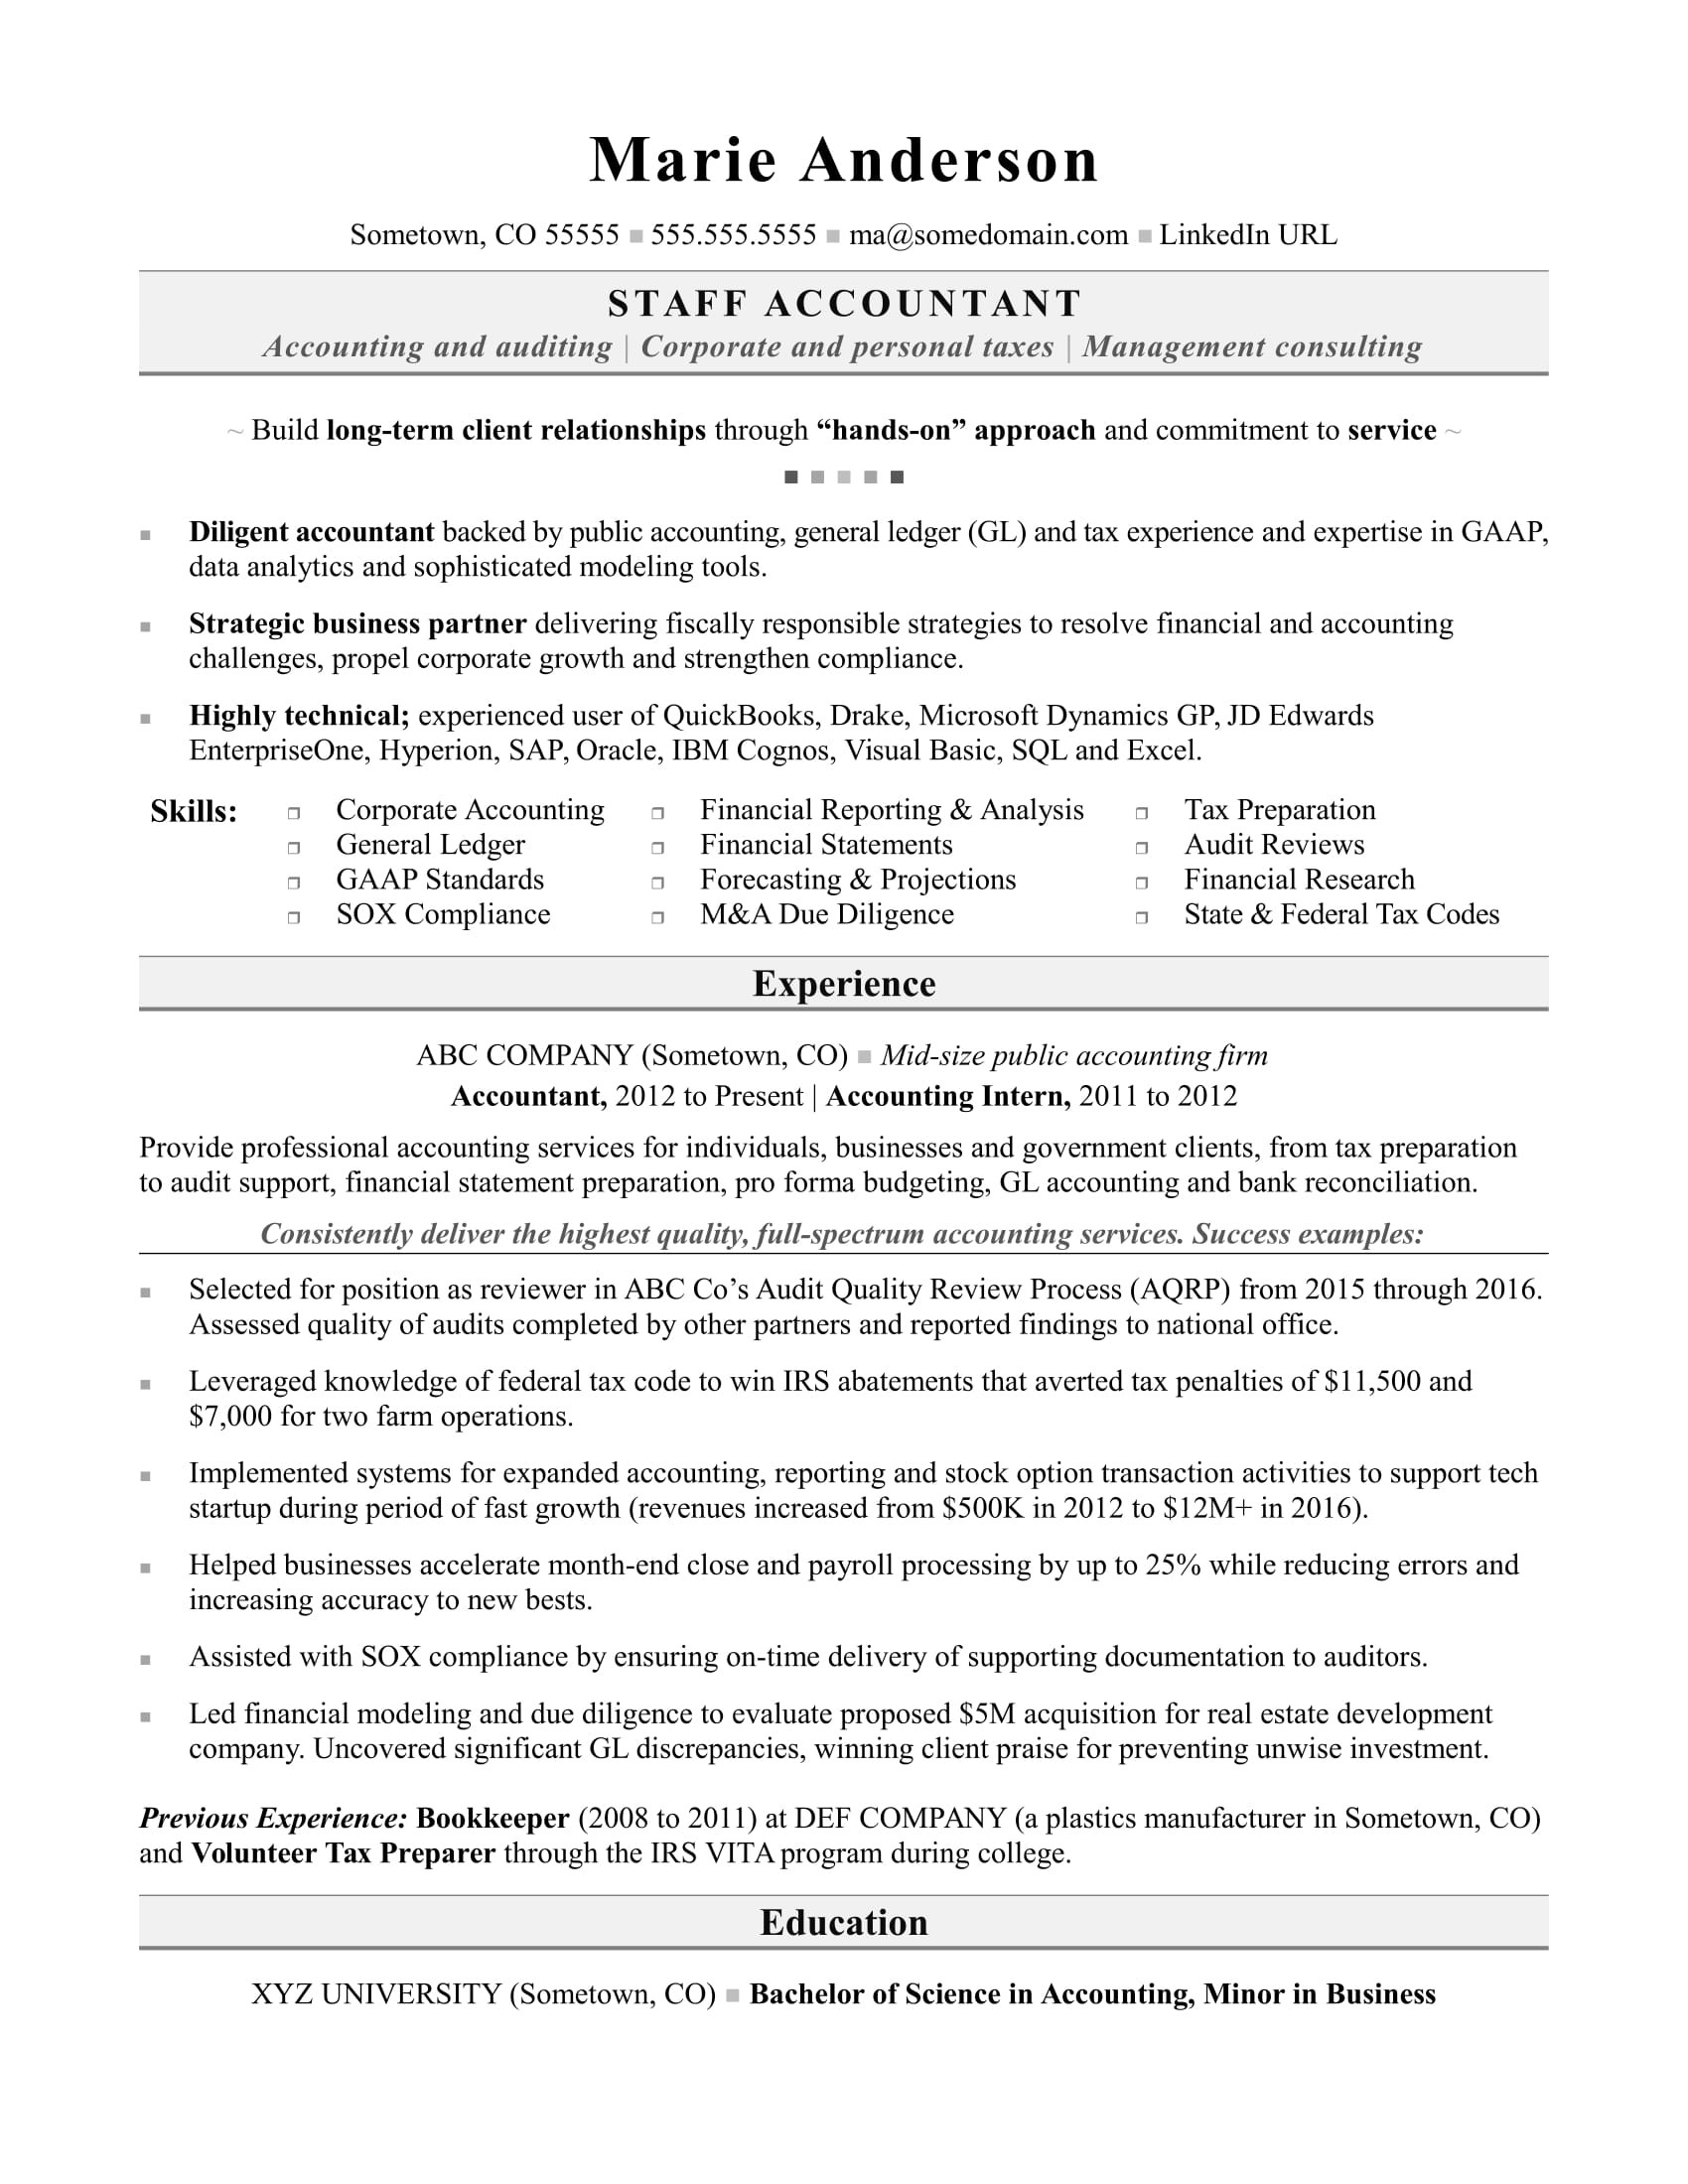 Resume Template for Long Term Employment Accounting Resume Sample Monster.com